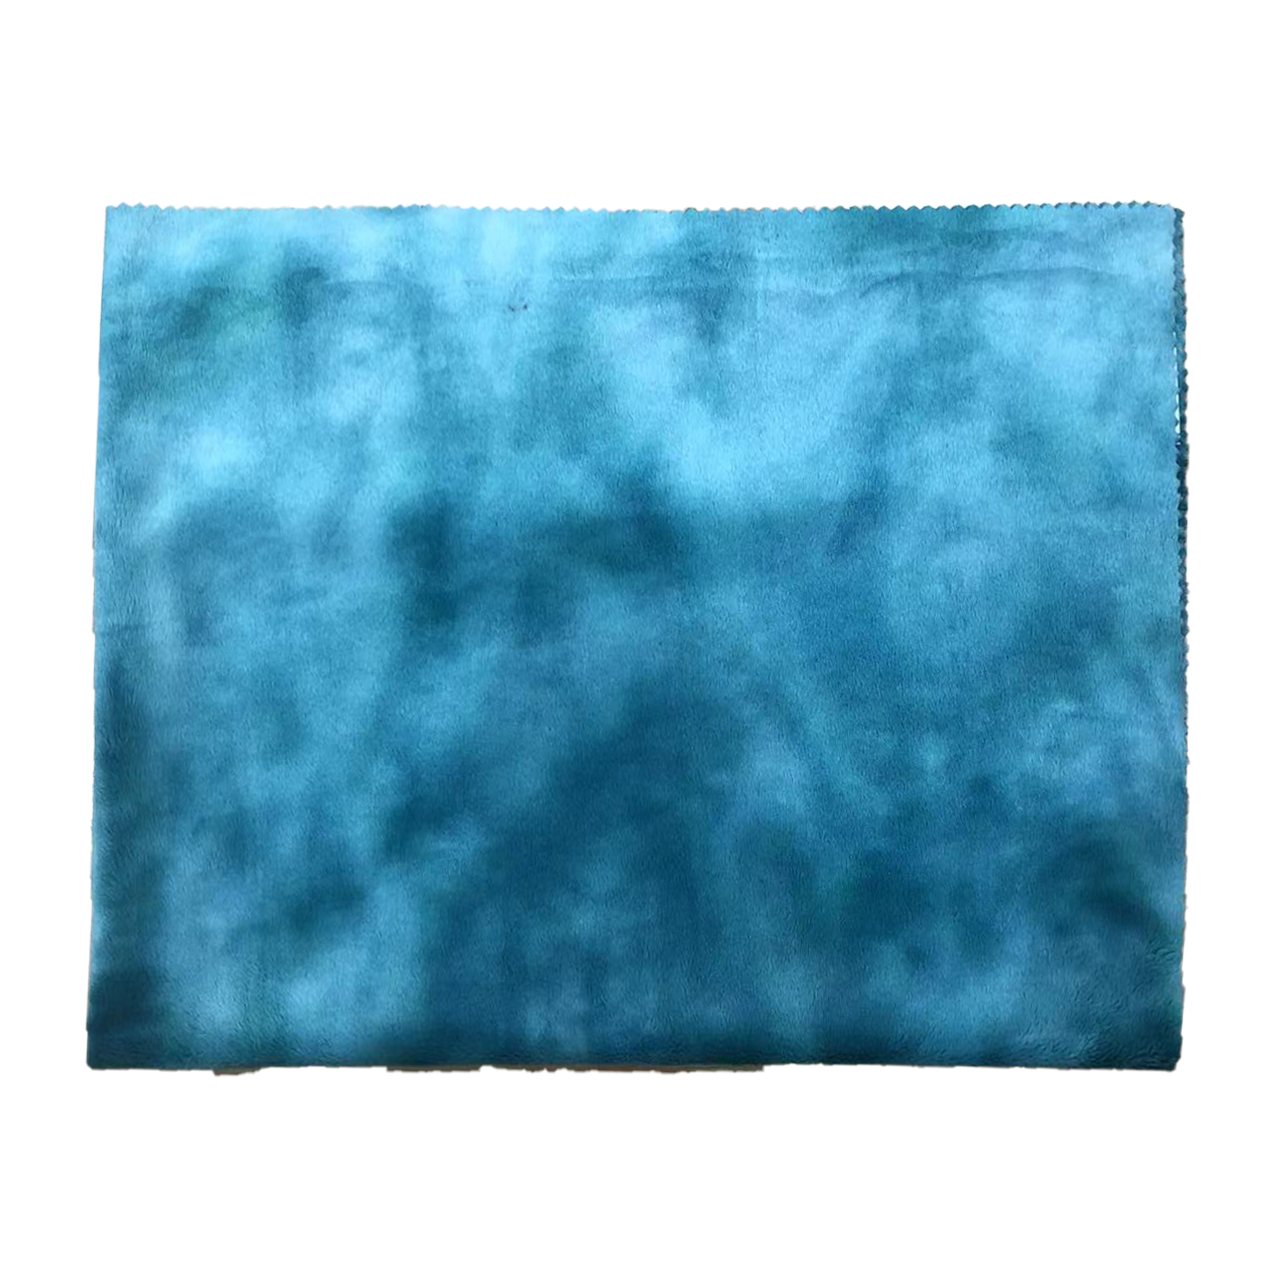 High Quality Ocean Blue Peaceful Printed Fleece for Sofa Couch Bed 100% Polyester Flannel Fabric Featured Image